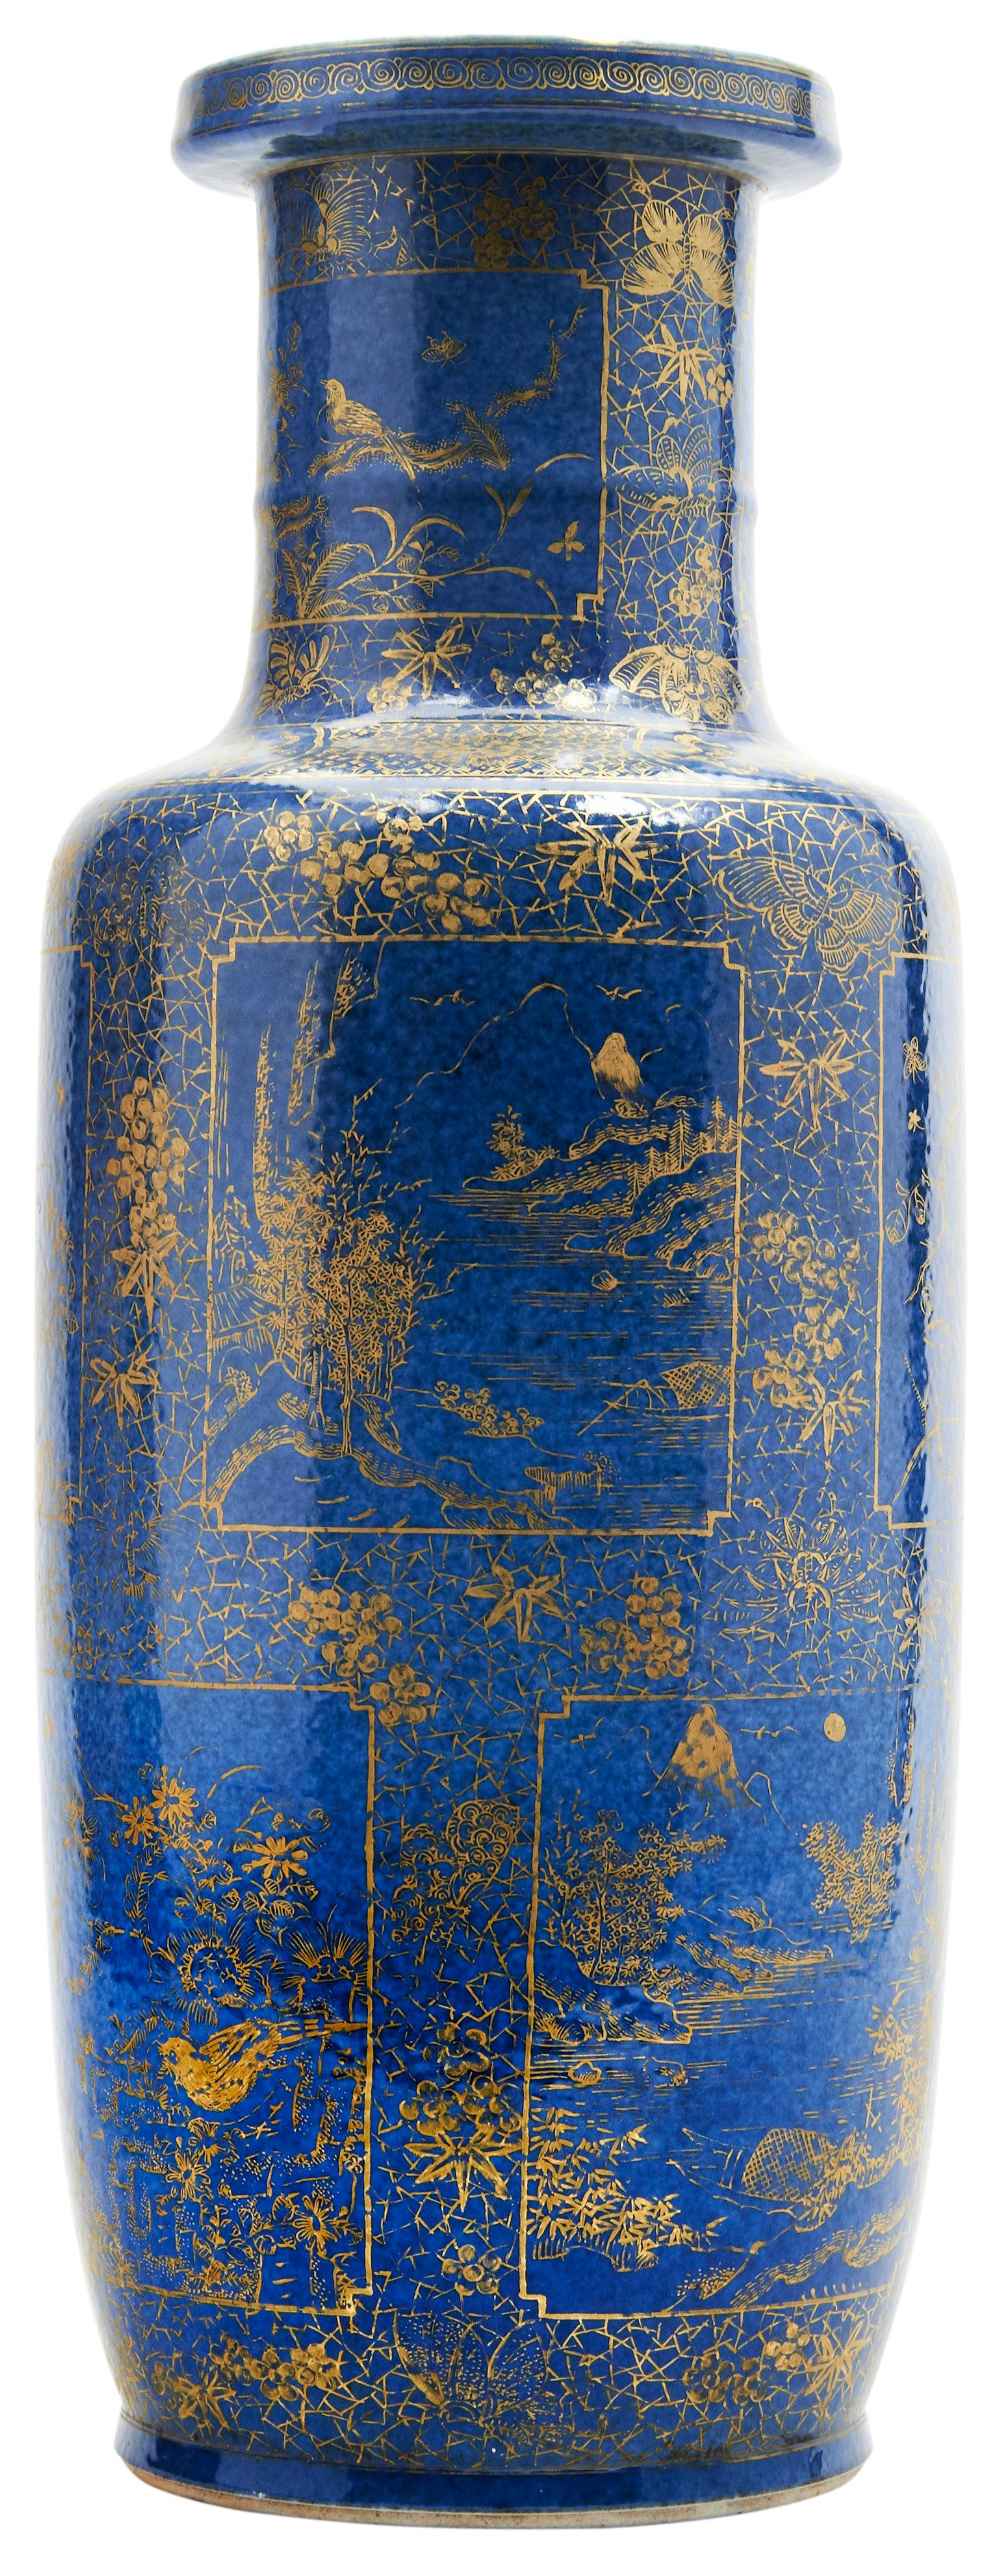 POWDER-BLUE-GROUND GILT-DECORATED ROULEAU VASE LATE QING DYNASTY the sides finely decorated with